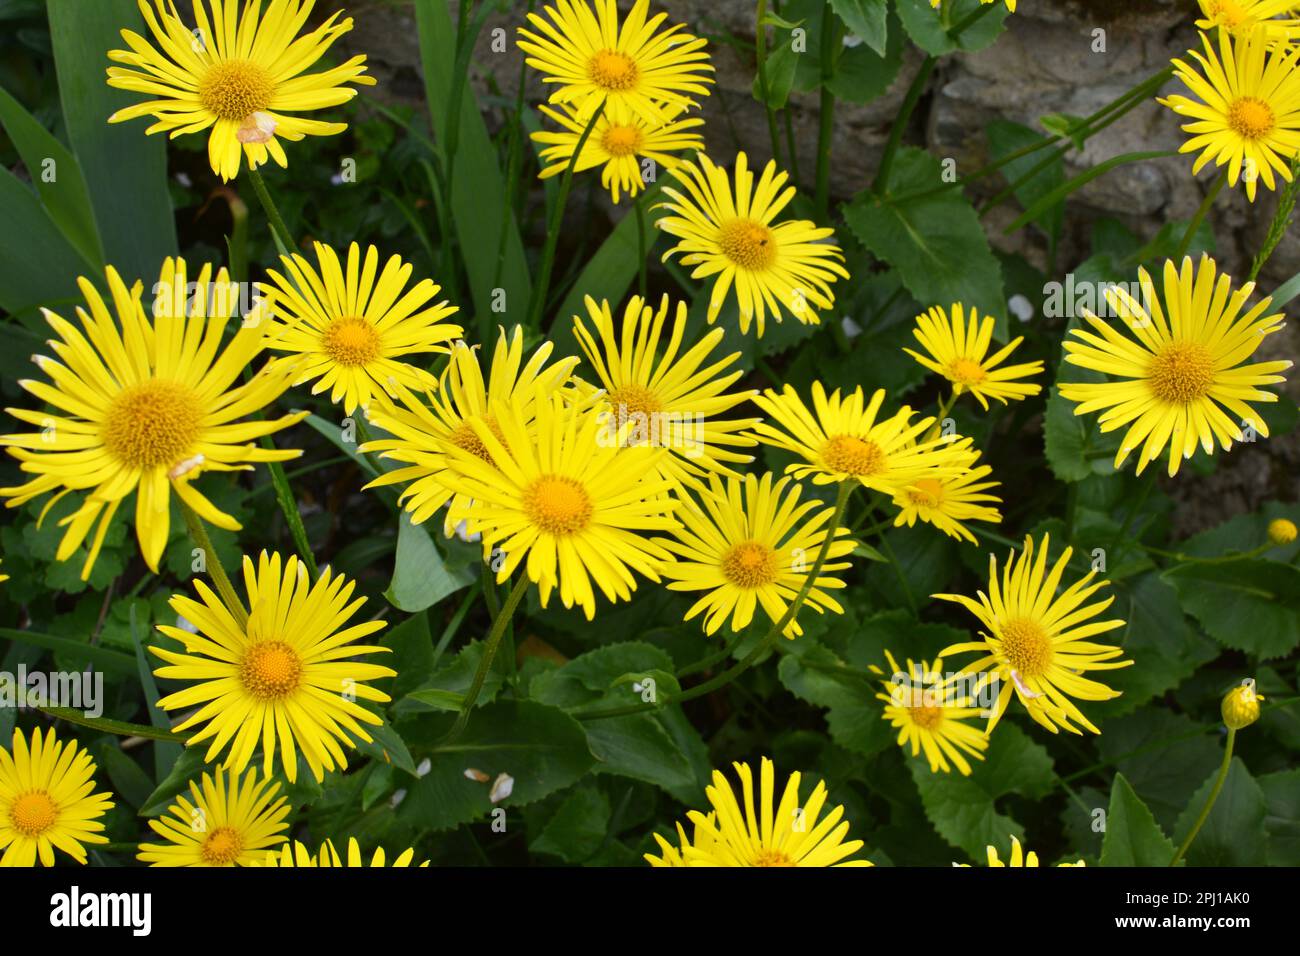 In spring, yellow doronicum chamomile blooms on the flowerbed Stock Photo